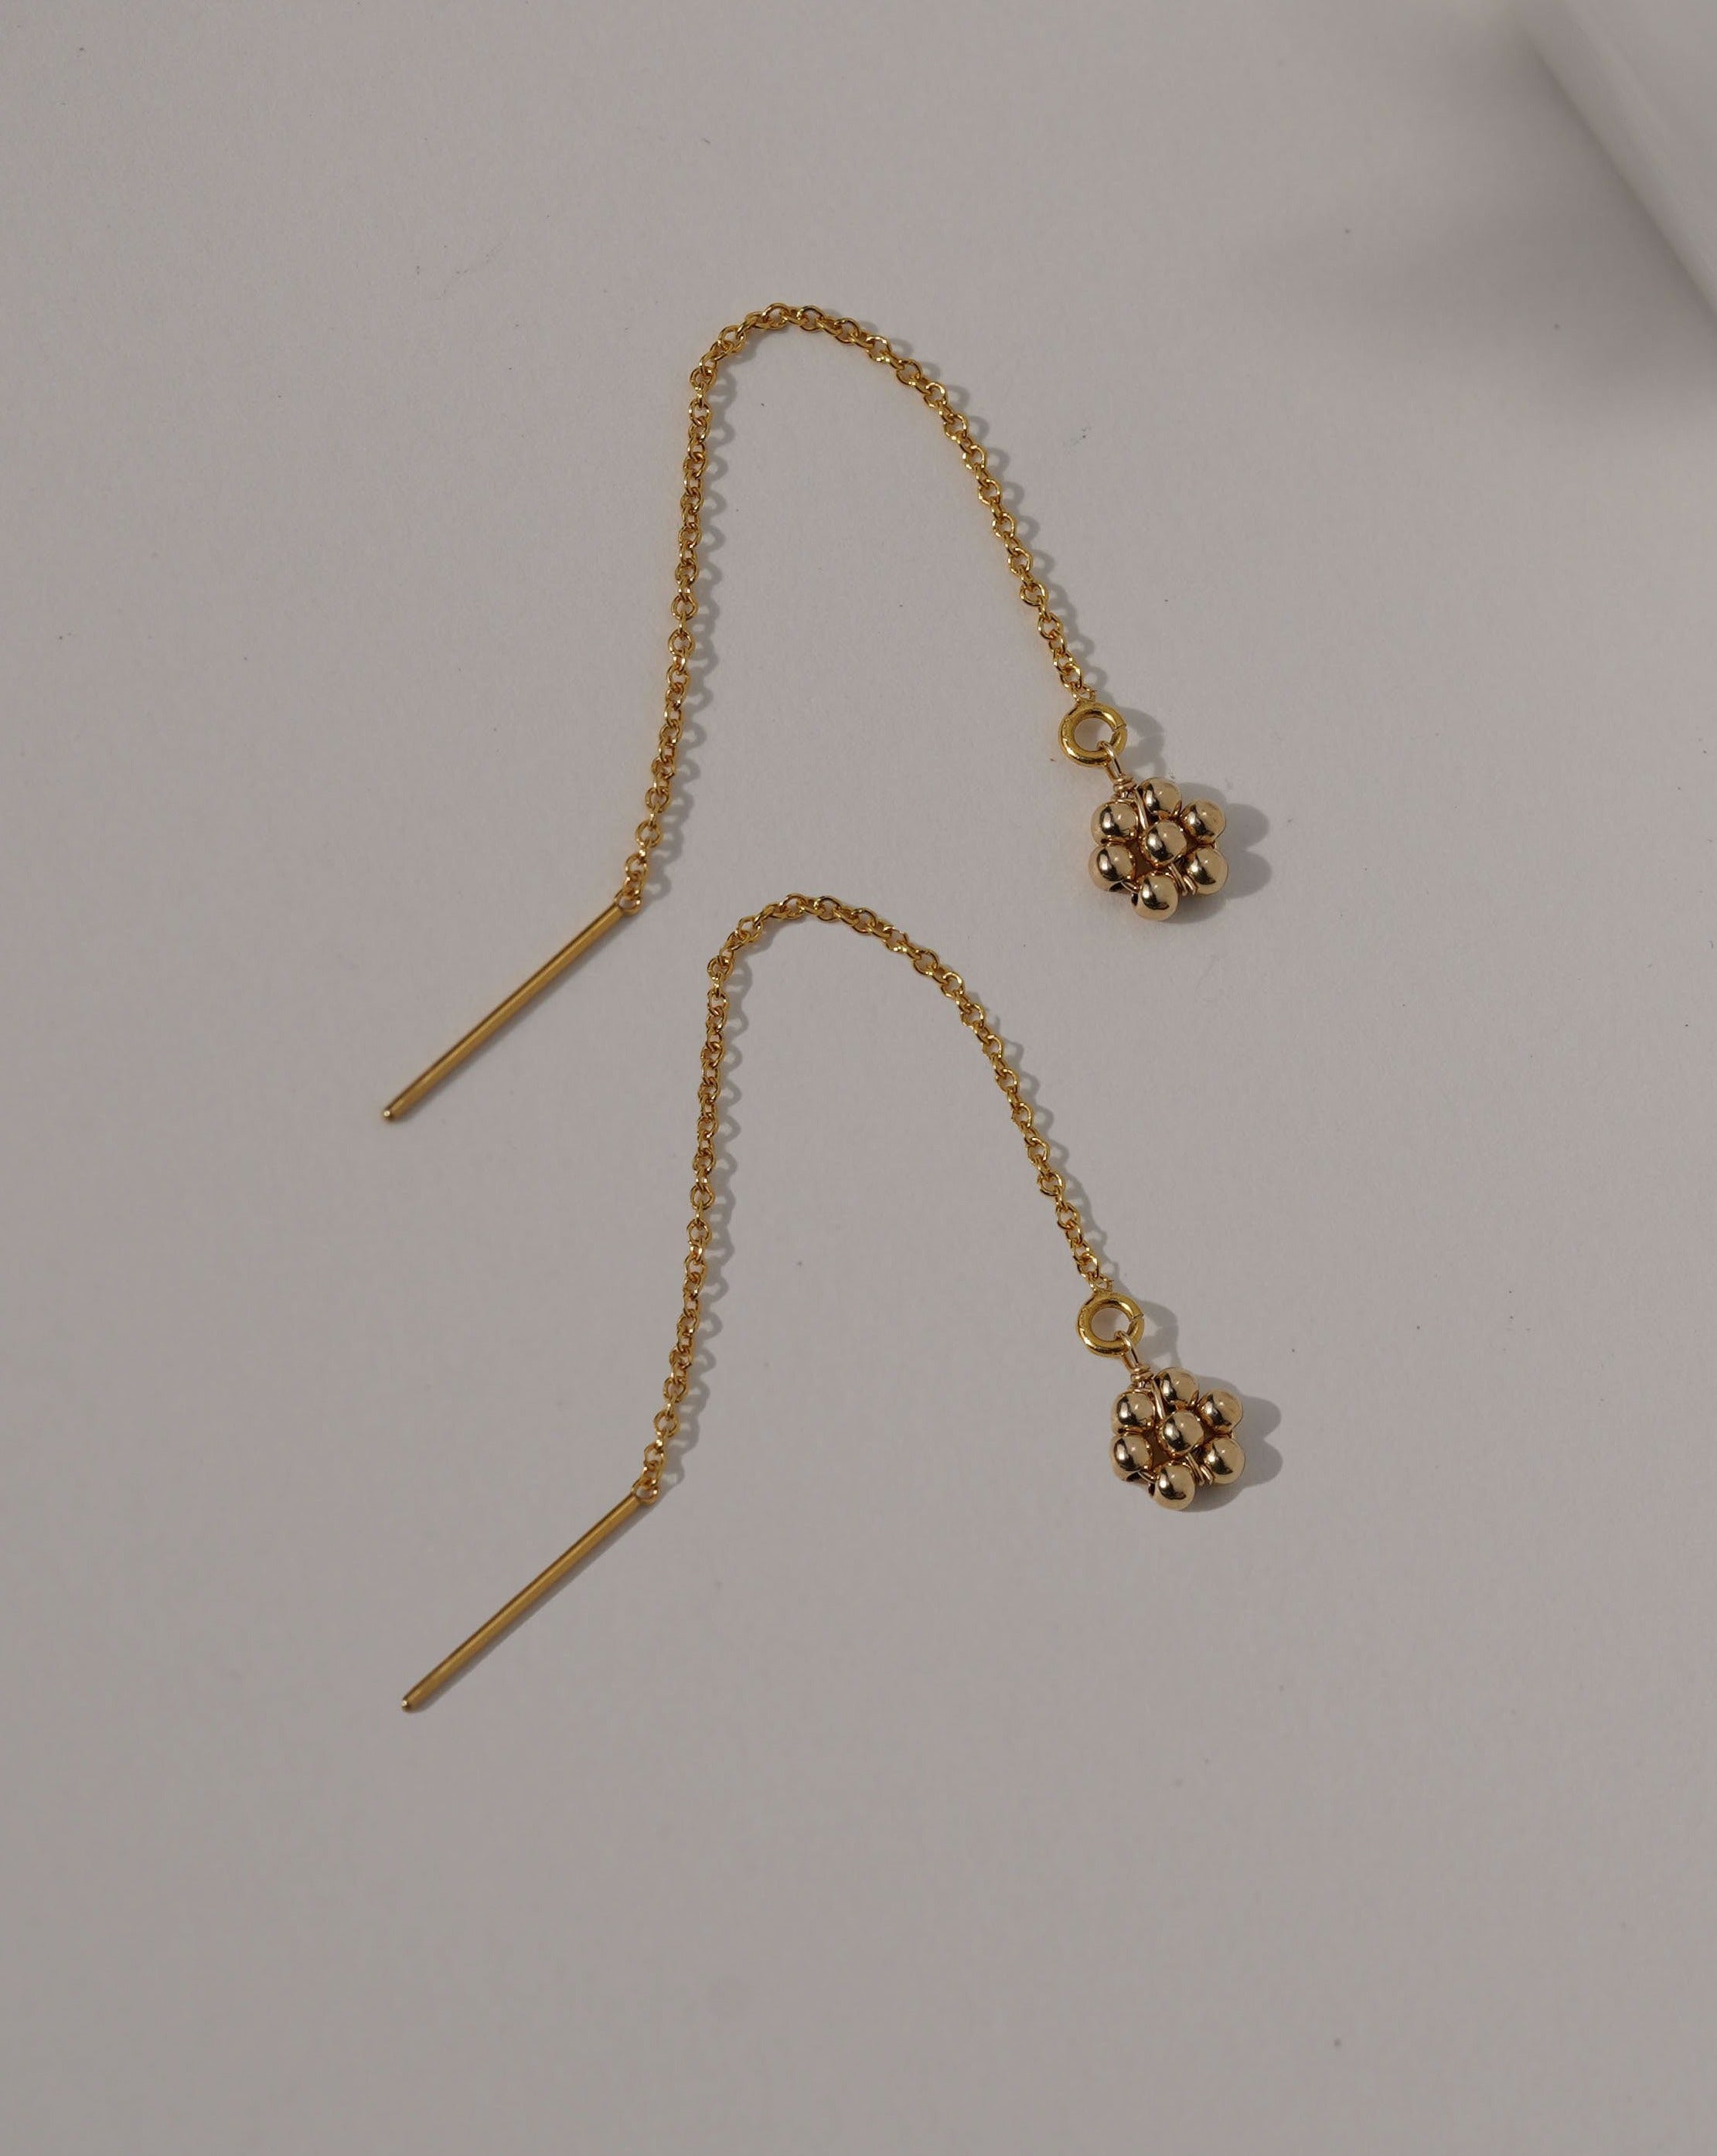 Noor Threader Earrings by KOZAKH. Threader style earrings, crafted in 14K Gold Filled, featuring handmade beaded daisy charms.